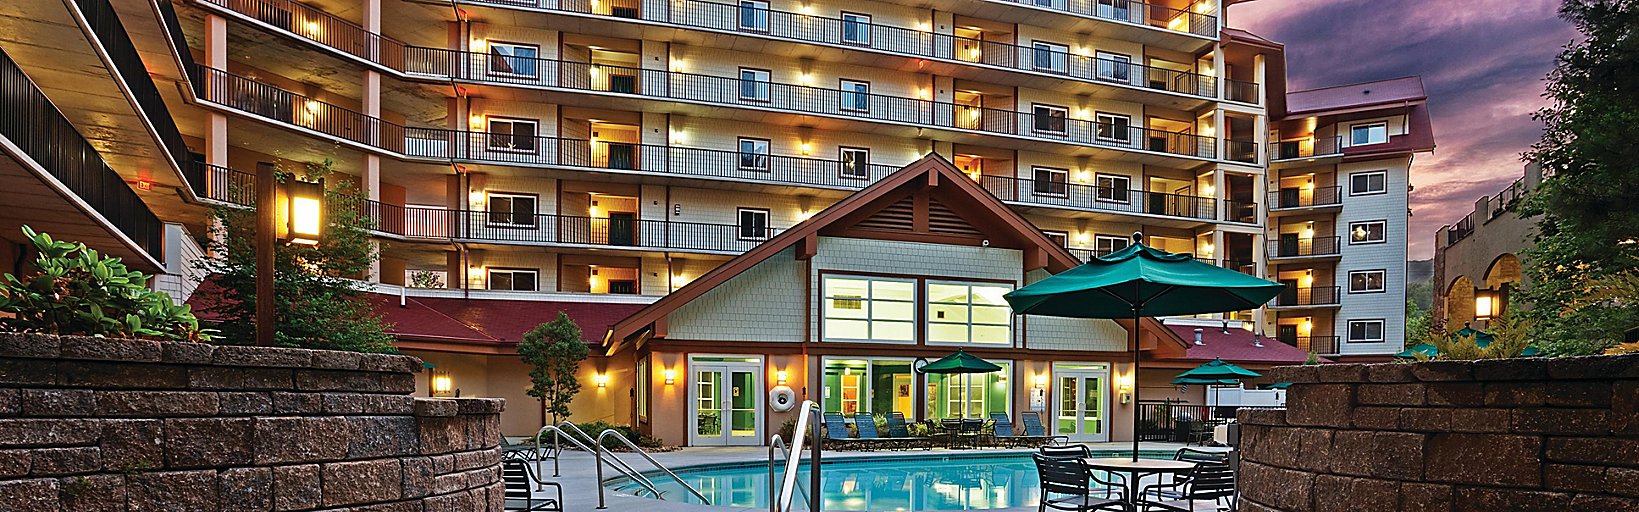 hotels in pigeon forge with indoor pool and pet friendly